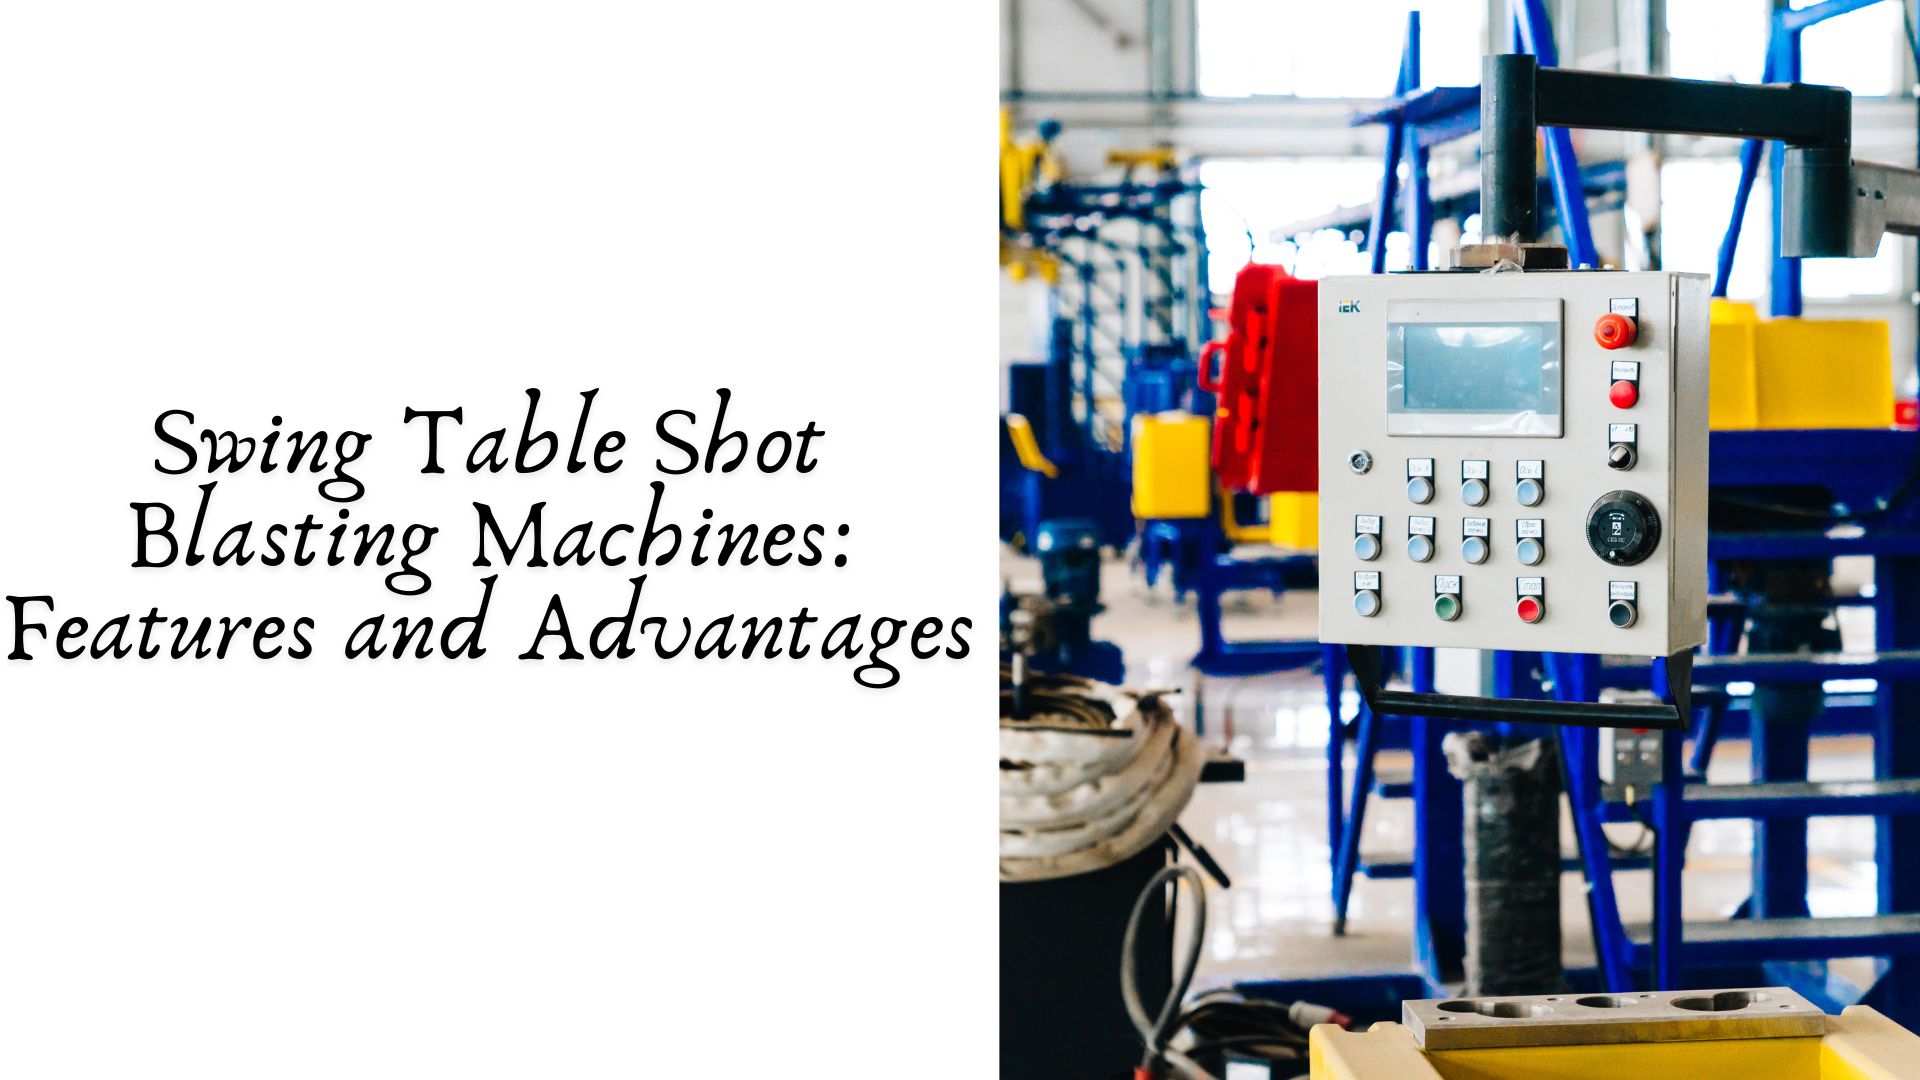 Swing Table Shot Blasting Machines: Features and Advantages